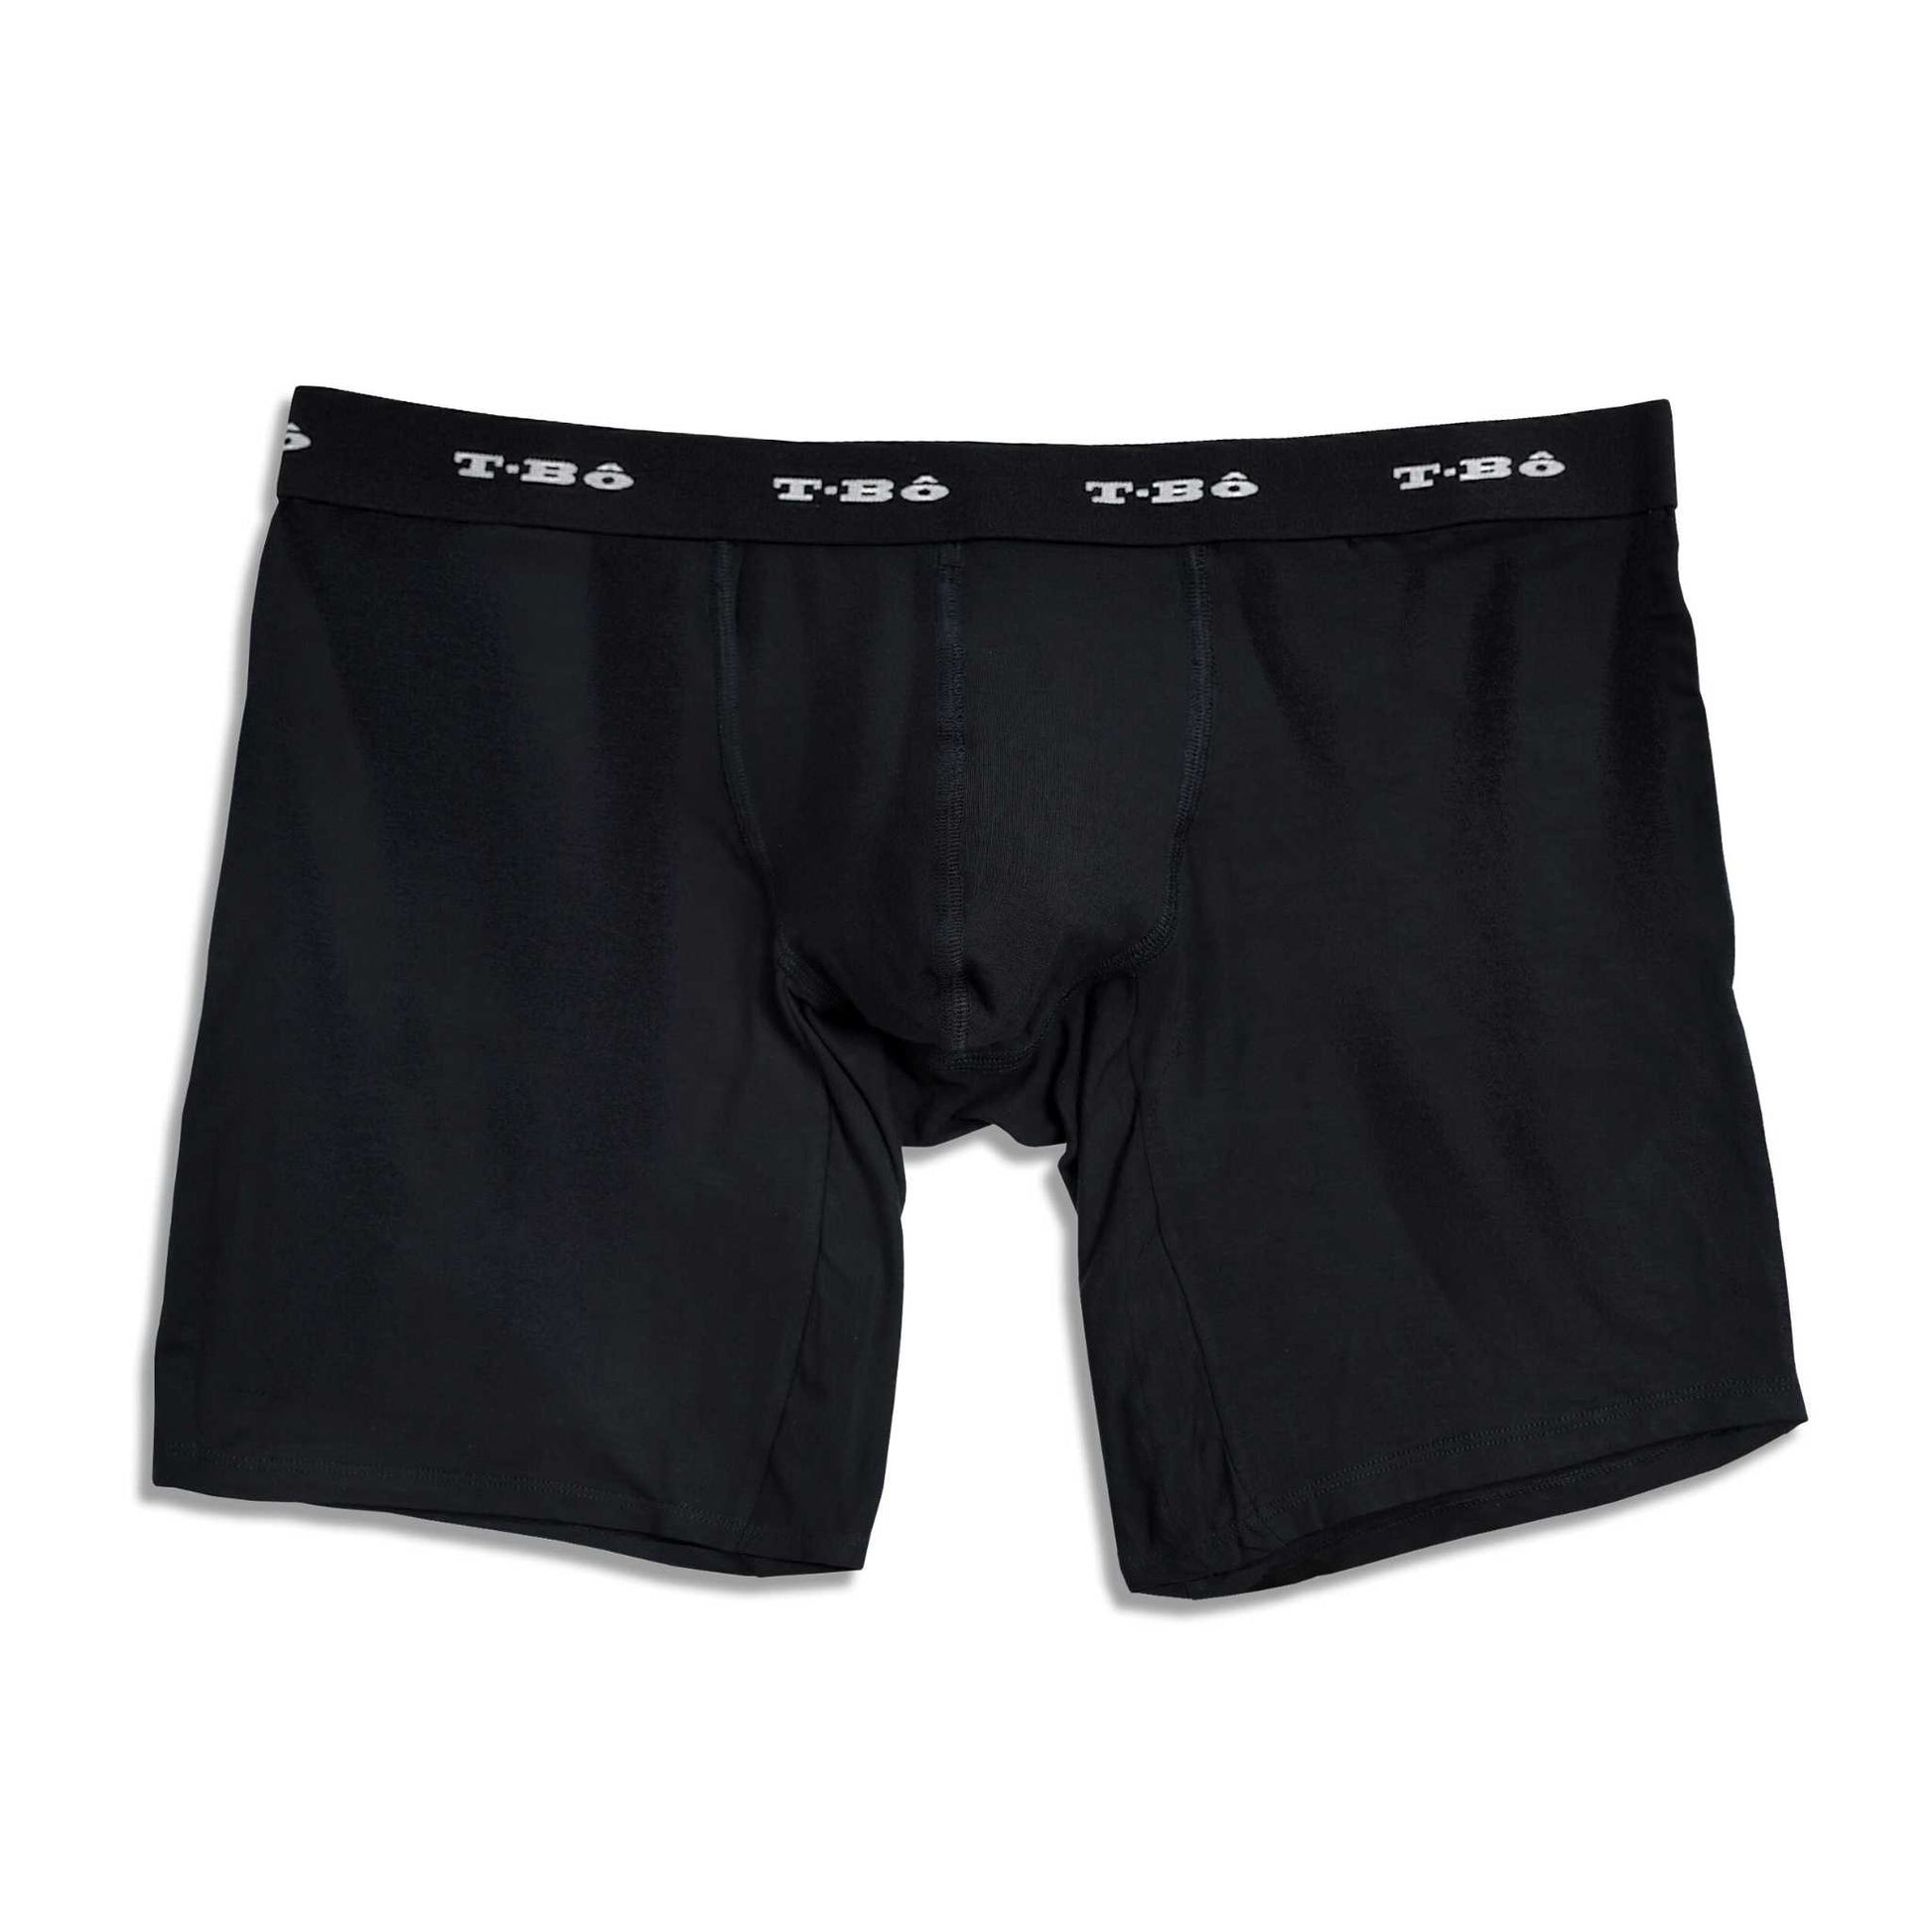 The 6 Boxer Brief 6-Pack